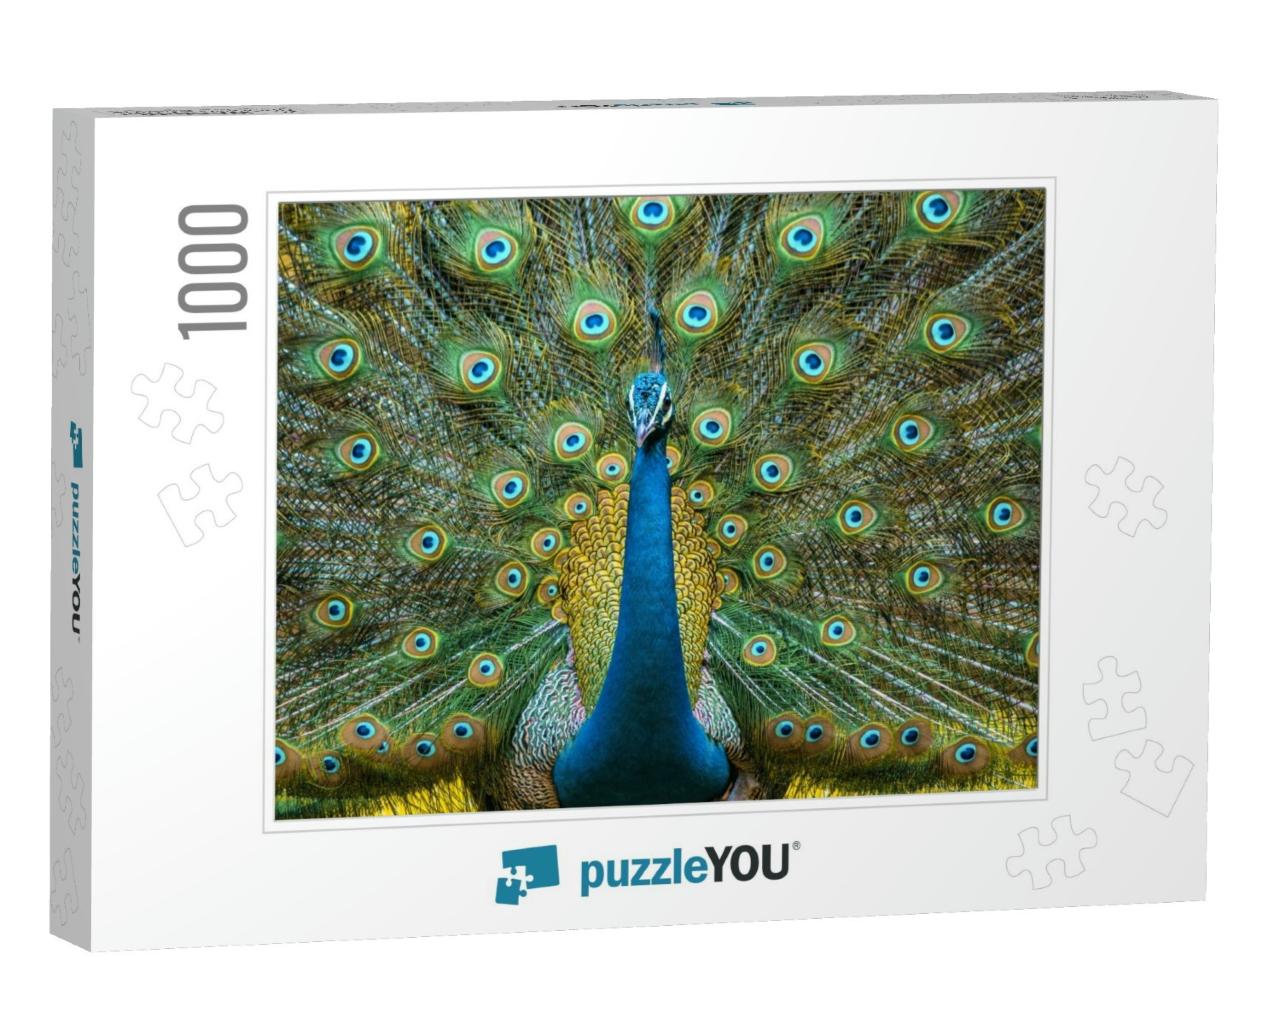 Peacock Displaying Vibrant Colors Its a National Bird of... Jigsaw Puzzle with 1000 pieces